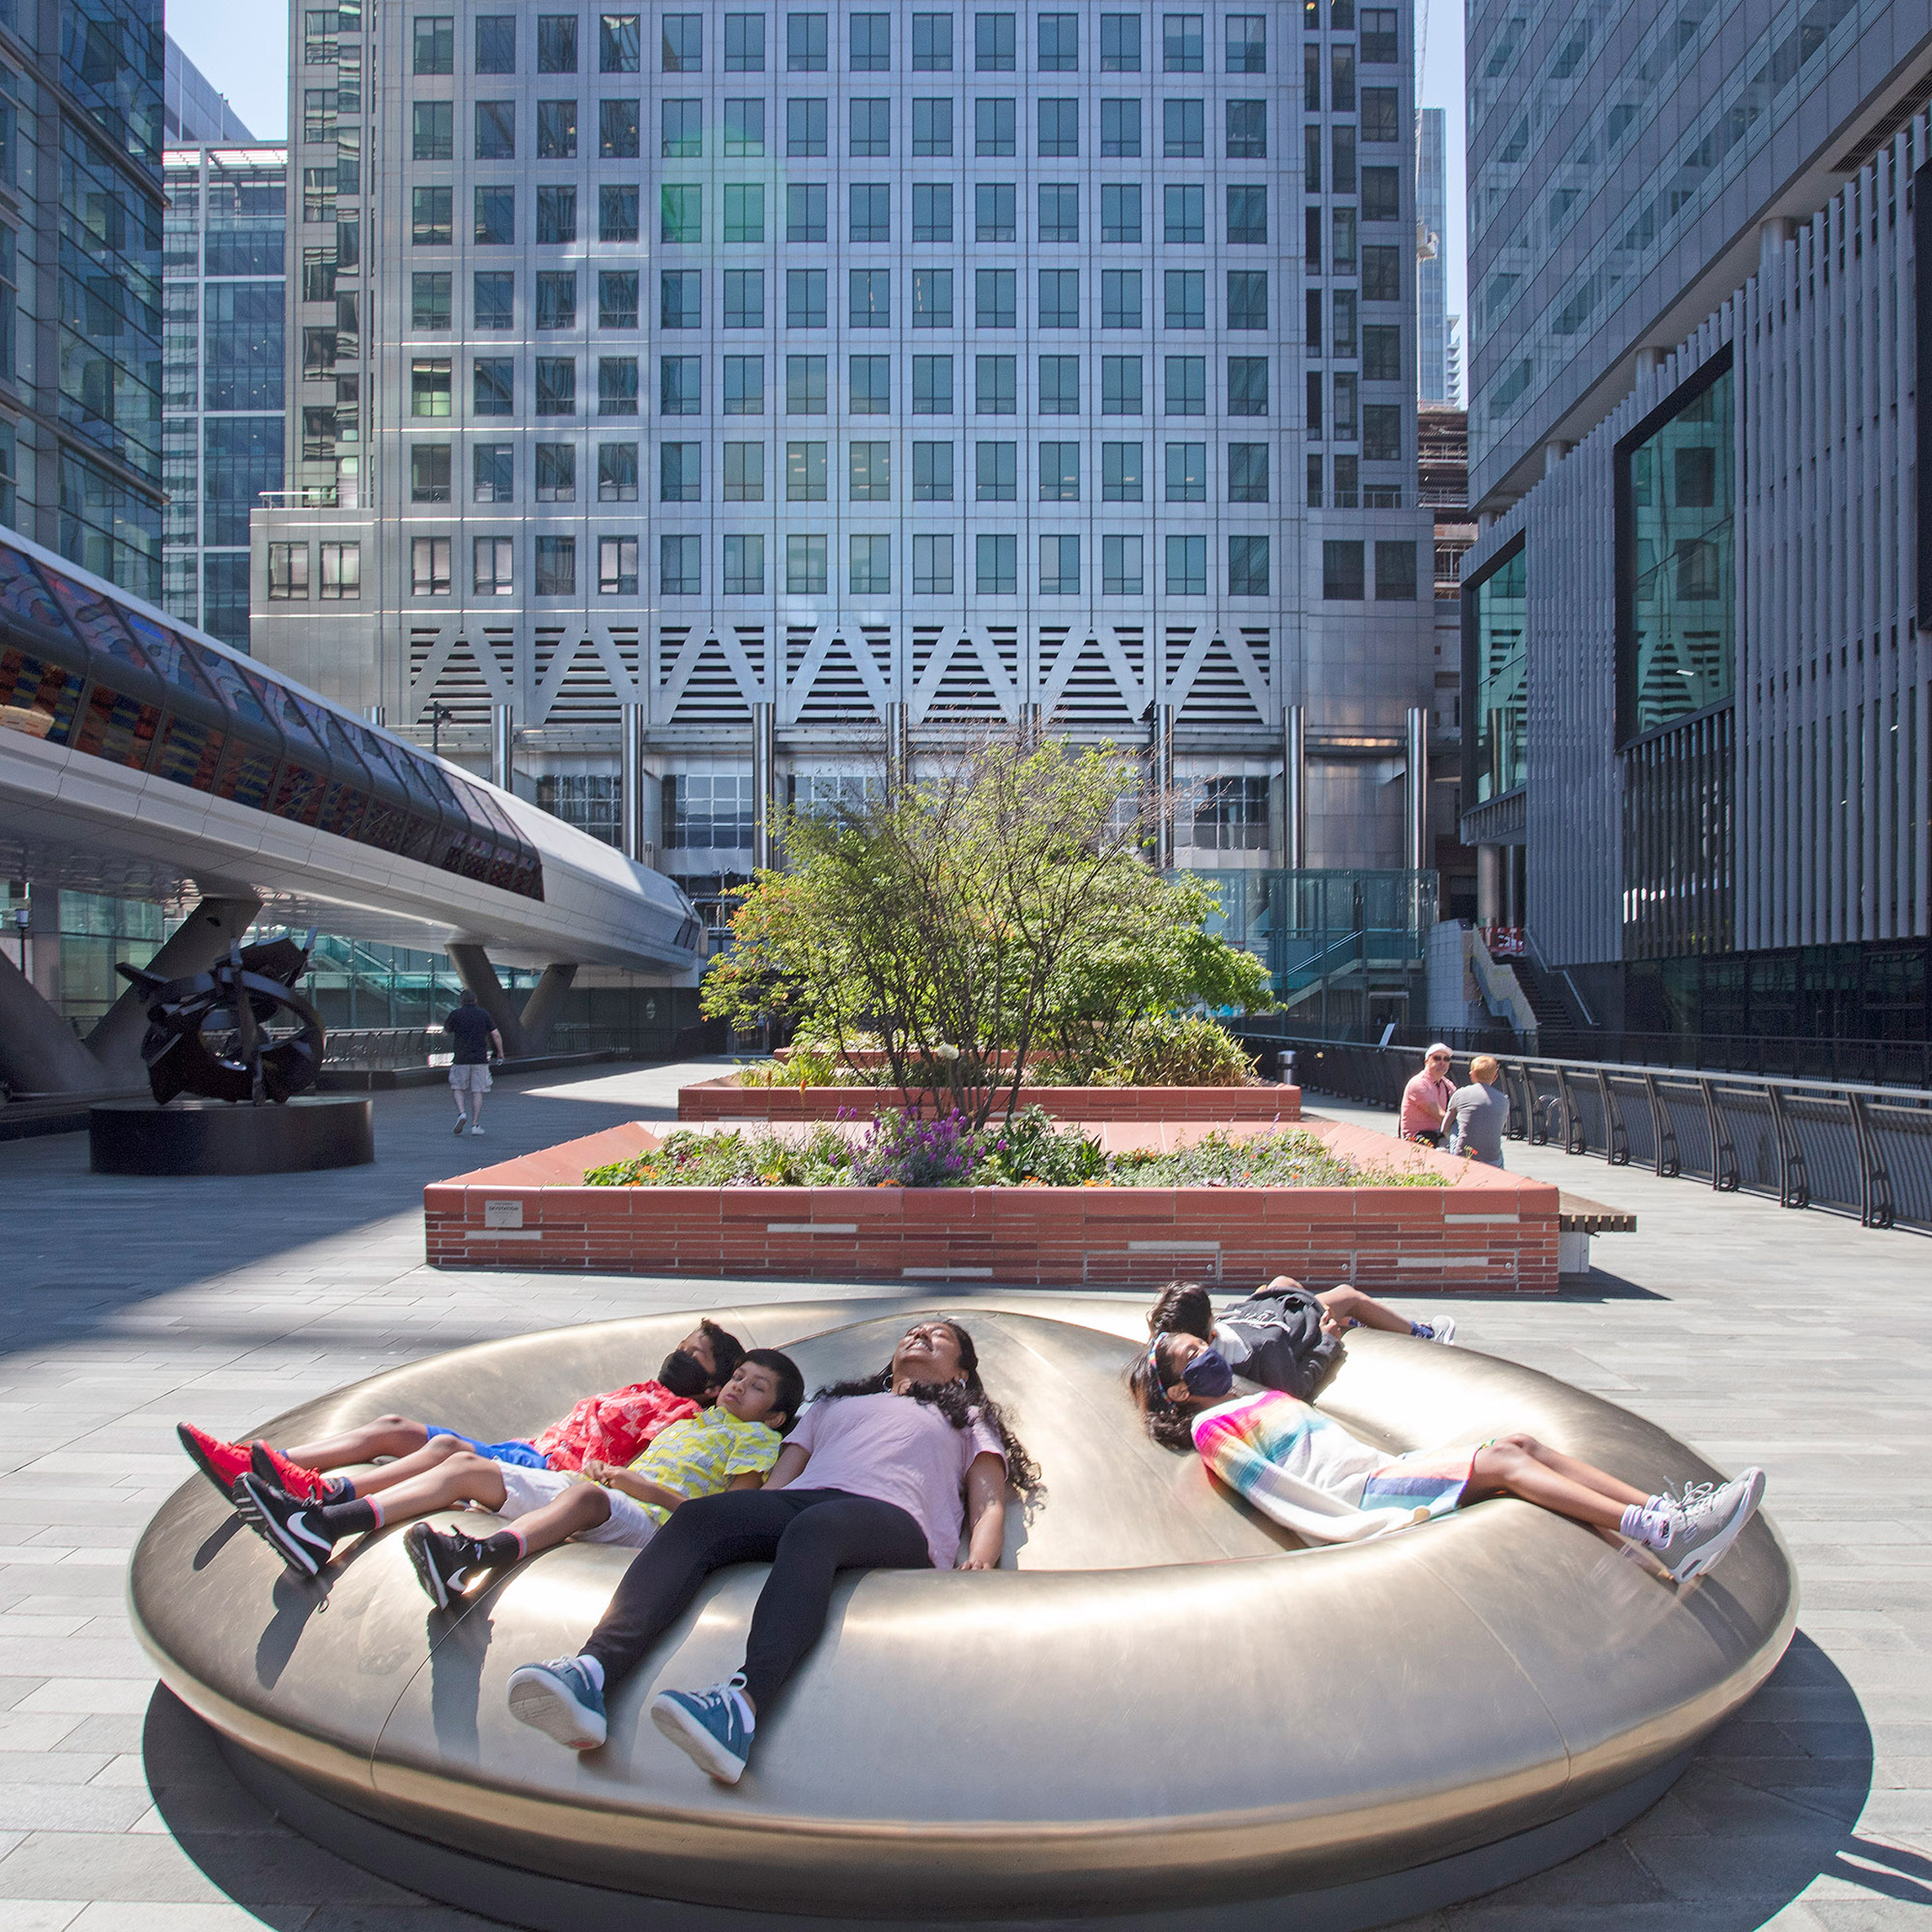 Public bank UFO by Peter Newman at Canary Wharf